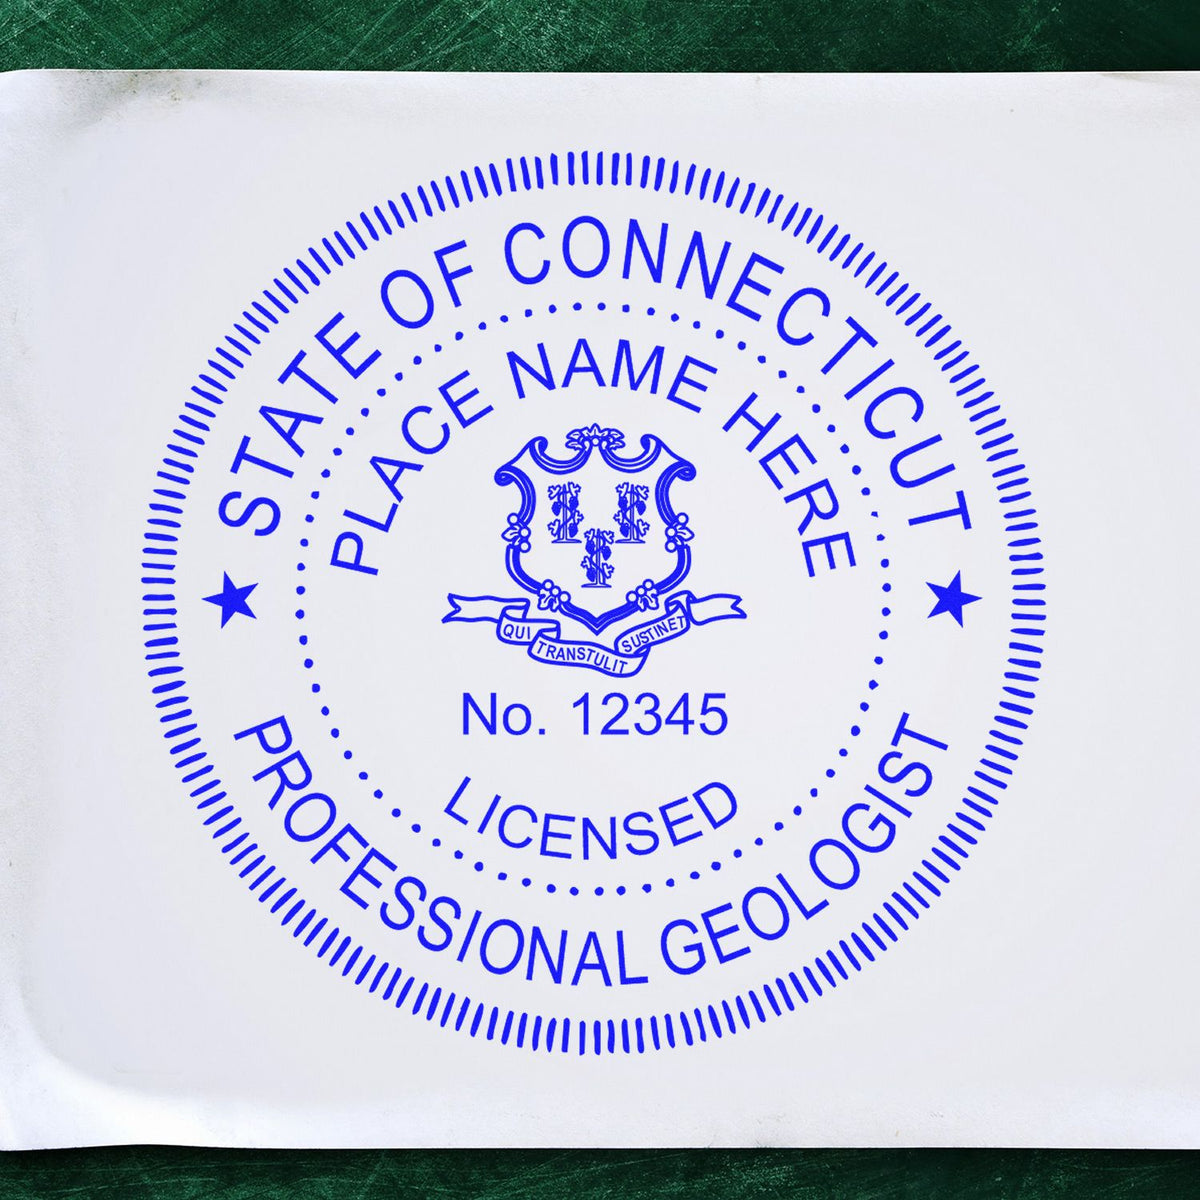 An alternative view of the Digital Connecticut Geologist Stamp, Electronic Seal for Connecticut Geologist stamped on a sheet of paper showing the image in use